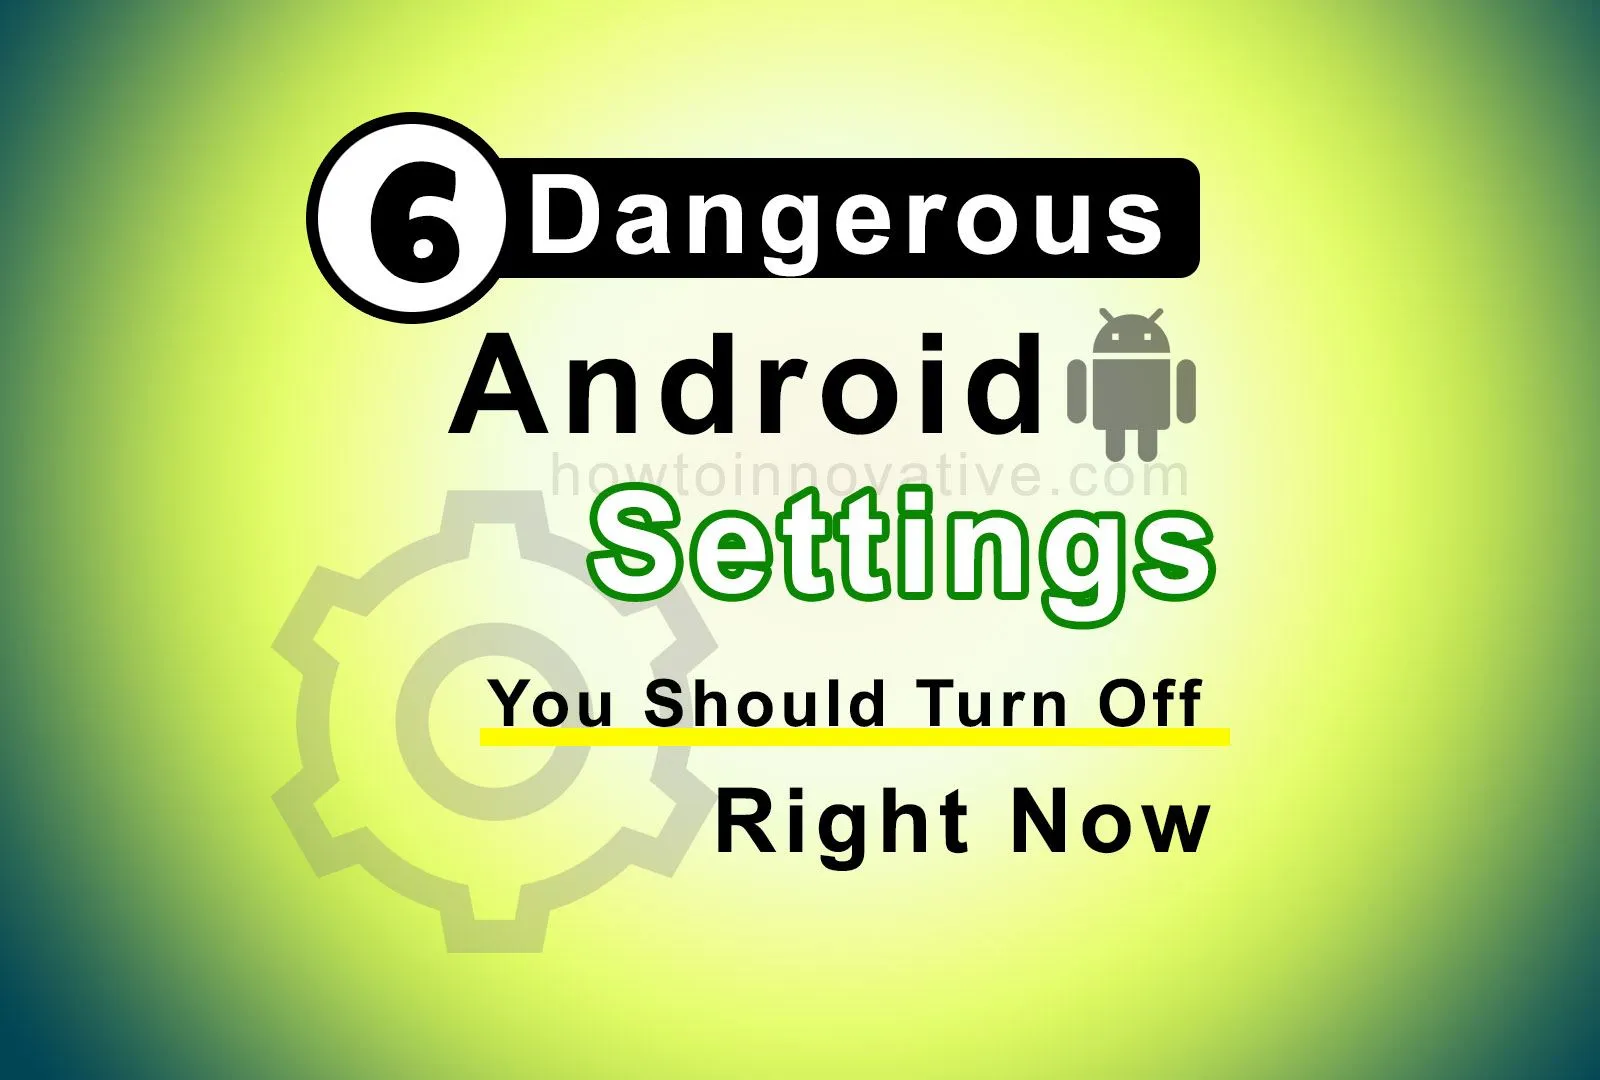 6 Dangerous Android Settings You Should Turn Off Right Now